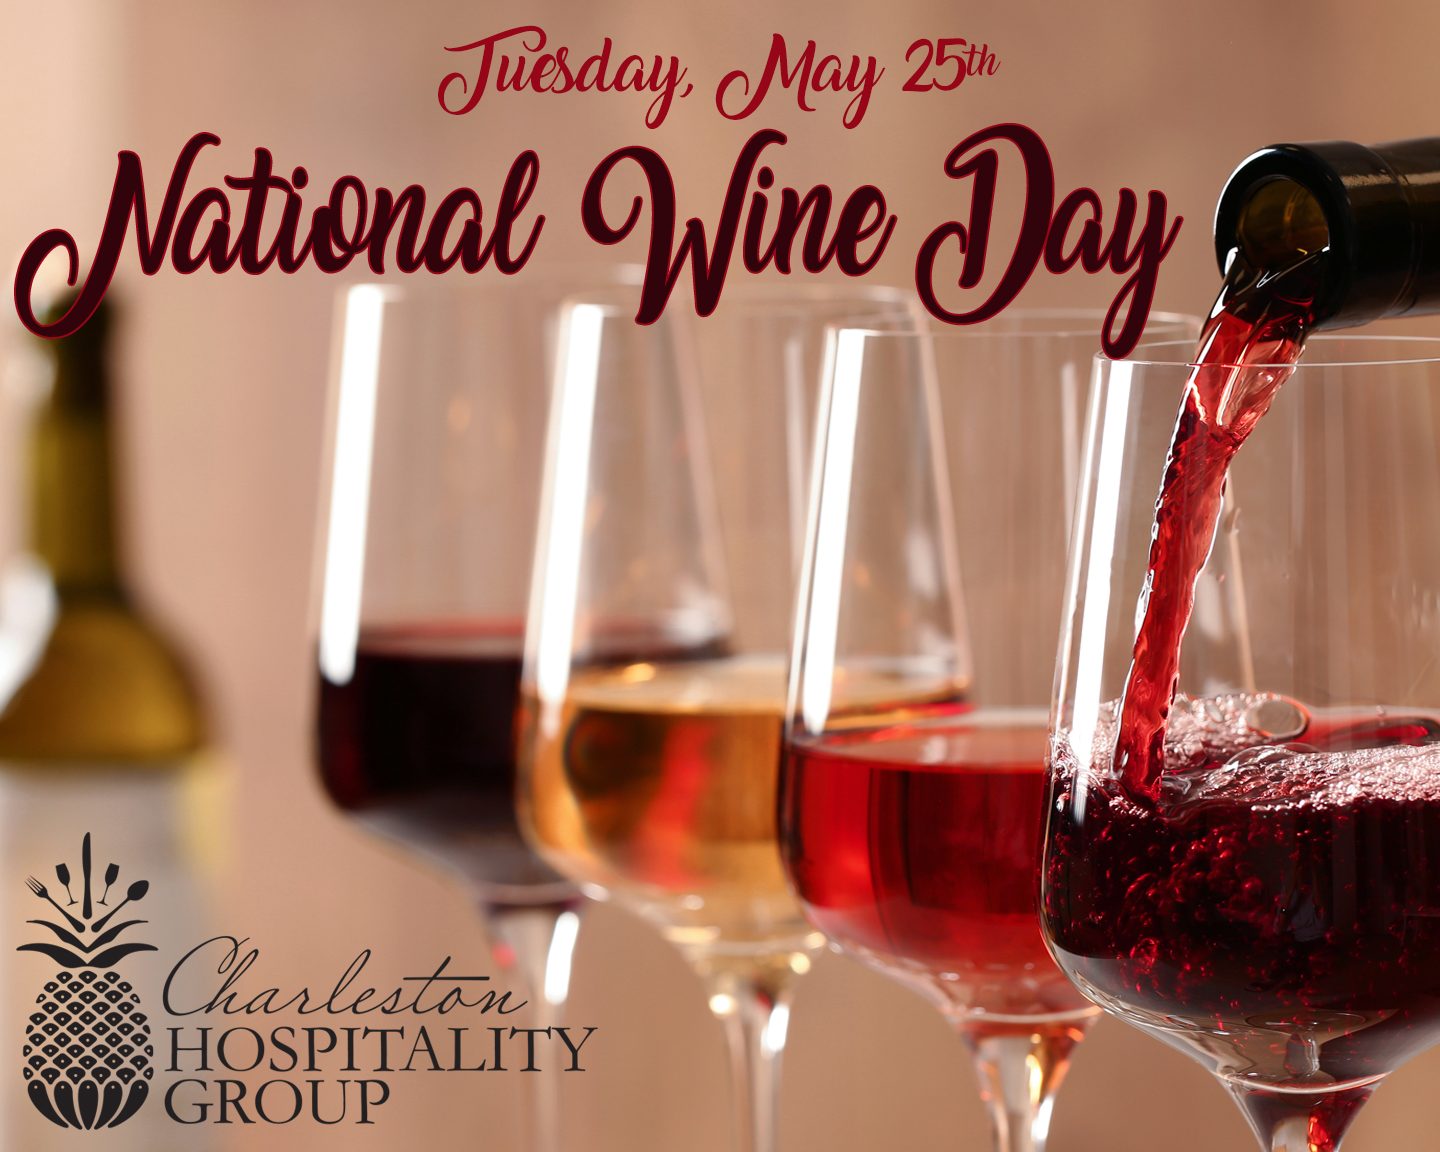 Wine & Dine All Day at Charleston Hospitality Group for National Wine Day